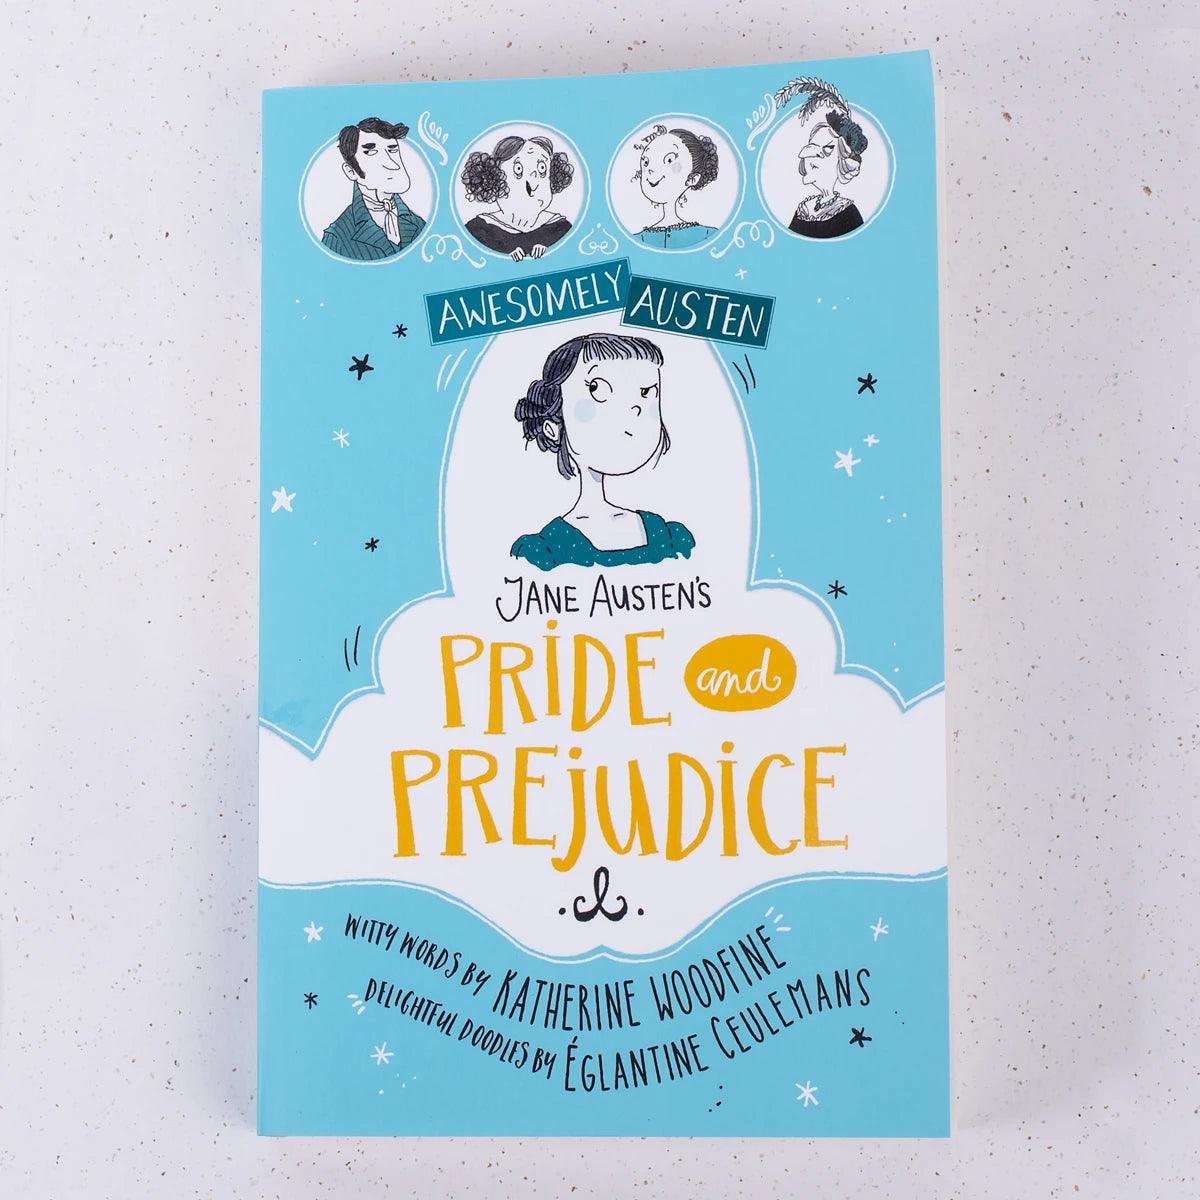 Jane Austen's Pride and Prejudice - Awesomely Austen Retold & Illustrated